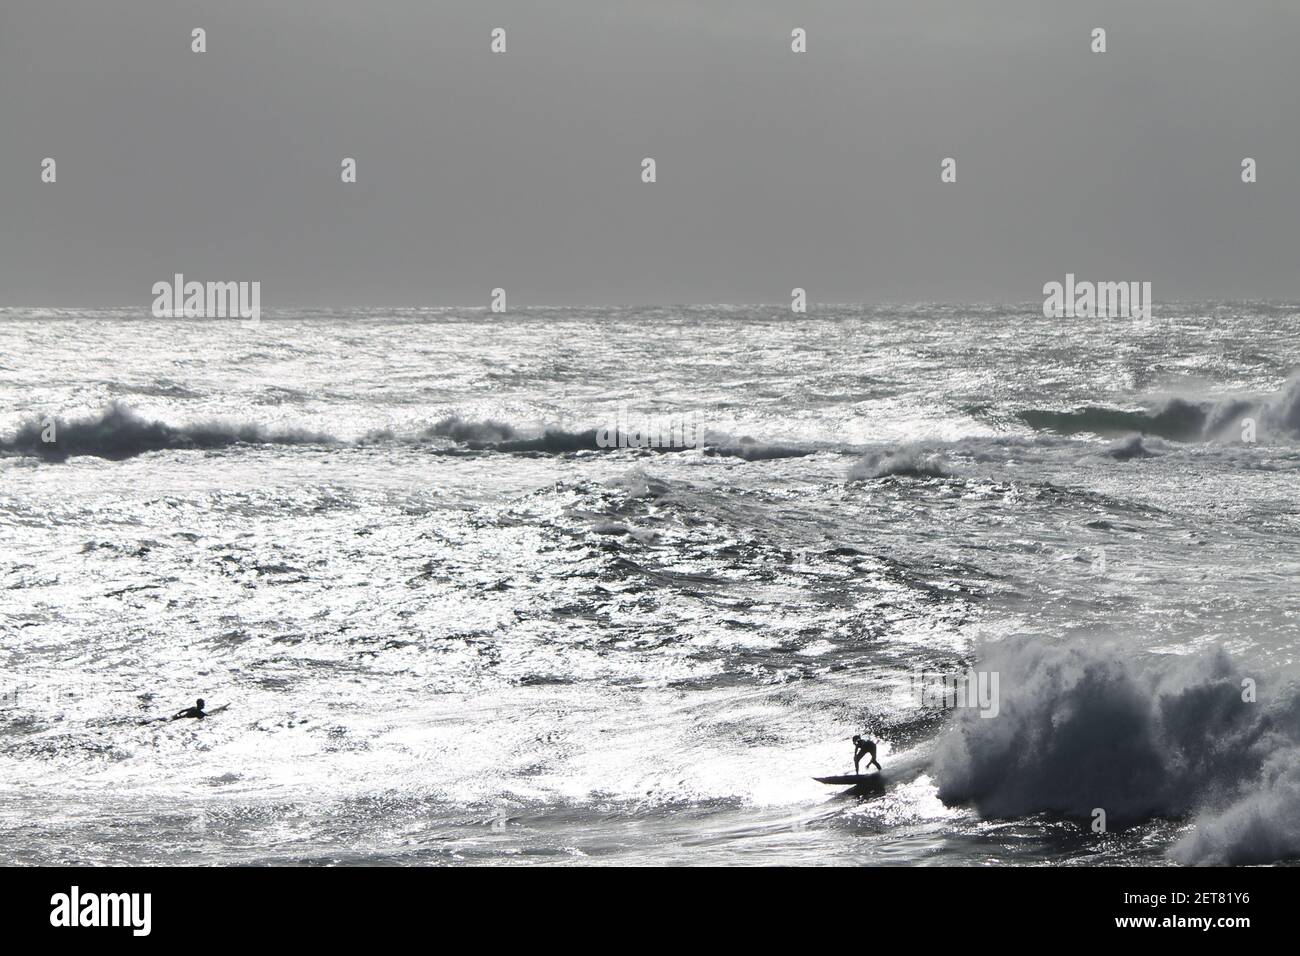 Surfer surfing a giant and sparkling wave in Coogee Australia Stock Photo